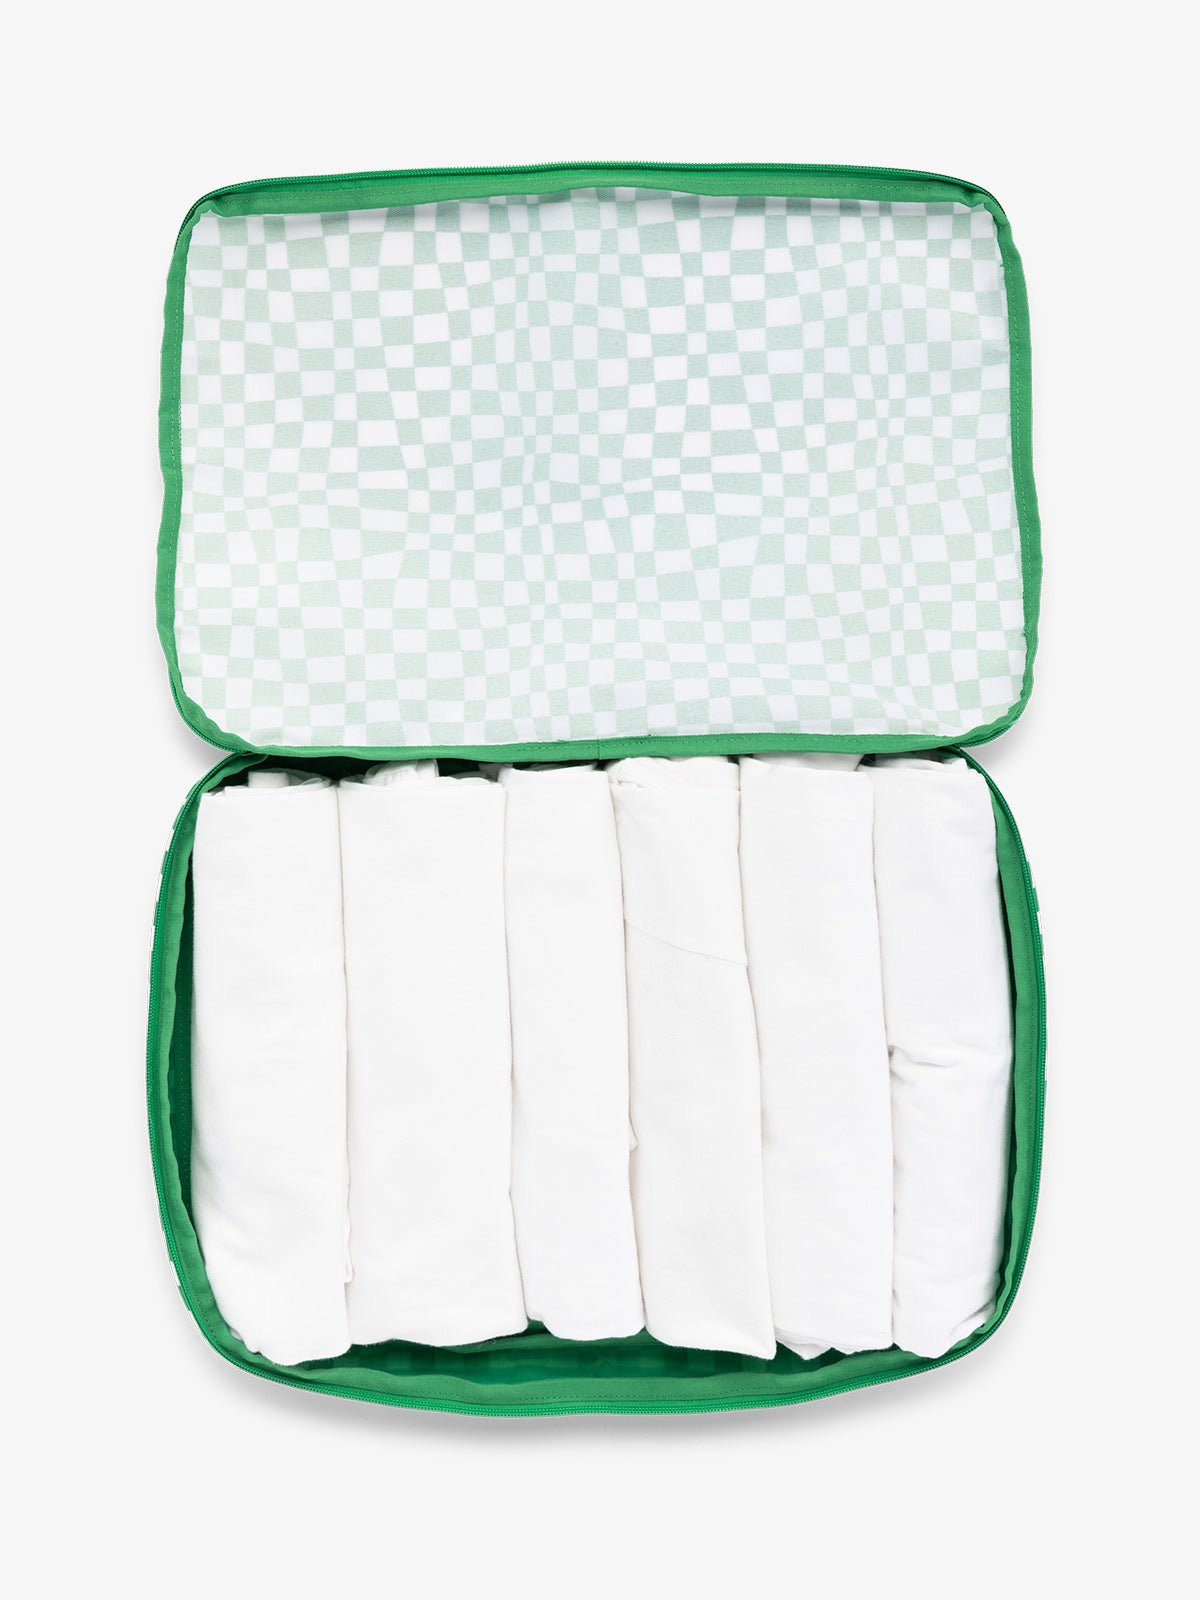 CALPAK Large Compression Packing cubes for travel made with durable materials in green and white checkered print